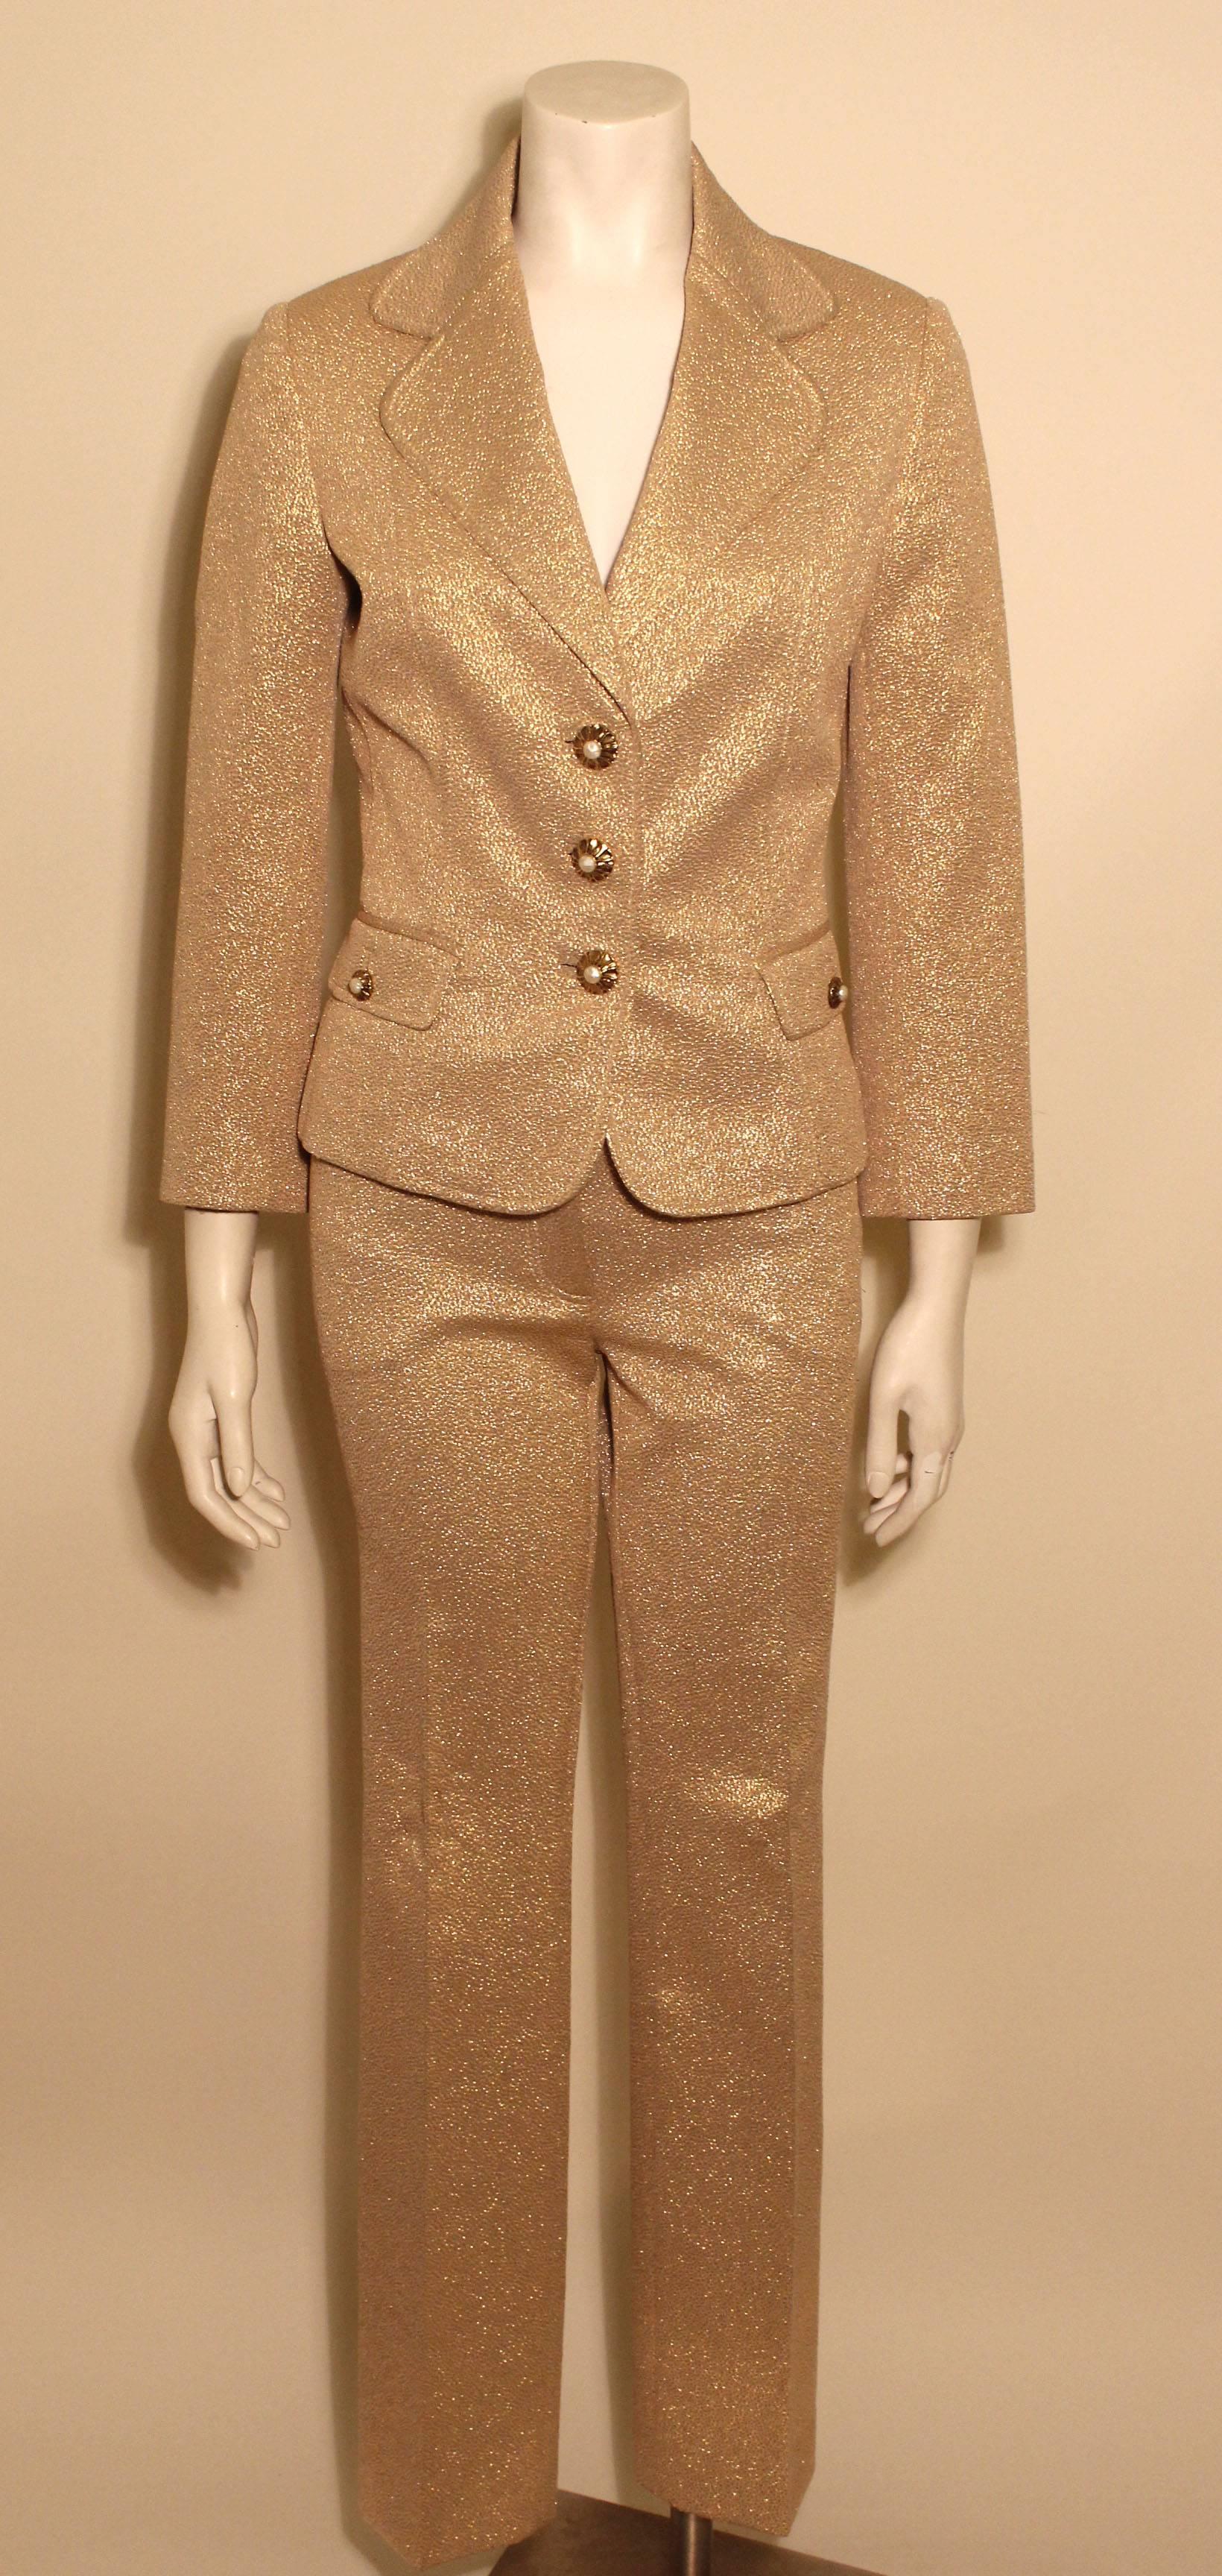 This glamorous gold pant suit is Dolce Gabbana perfection. The straight tapered pants hang low on the hips with wide belt loops and slit front pockets, as well as back flap pockets with buttons. The jacket is fitted and slightly cropped with gold